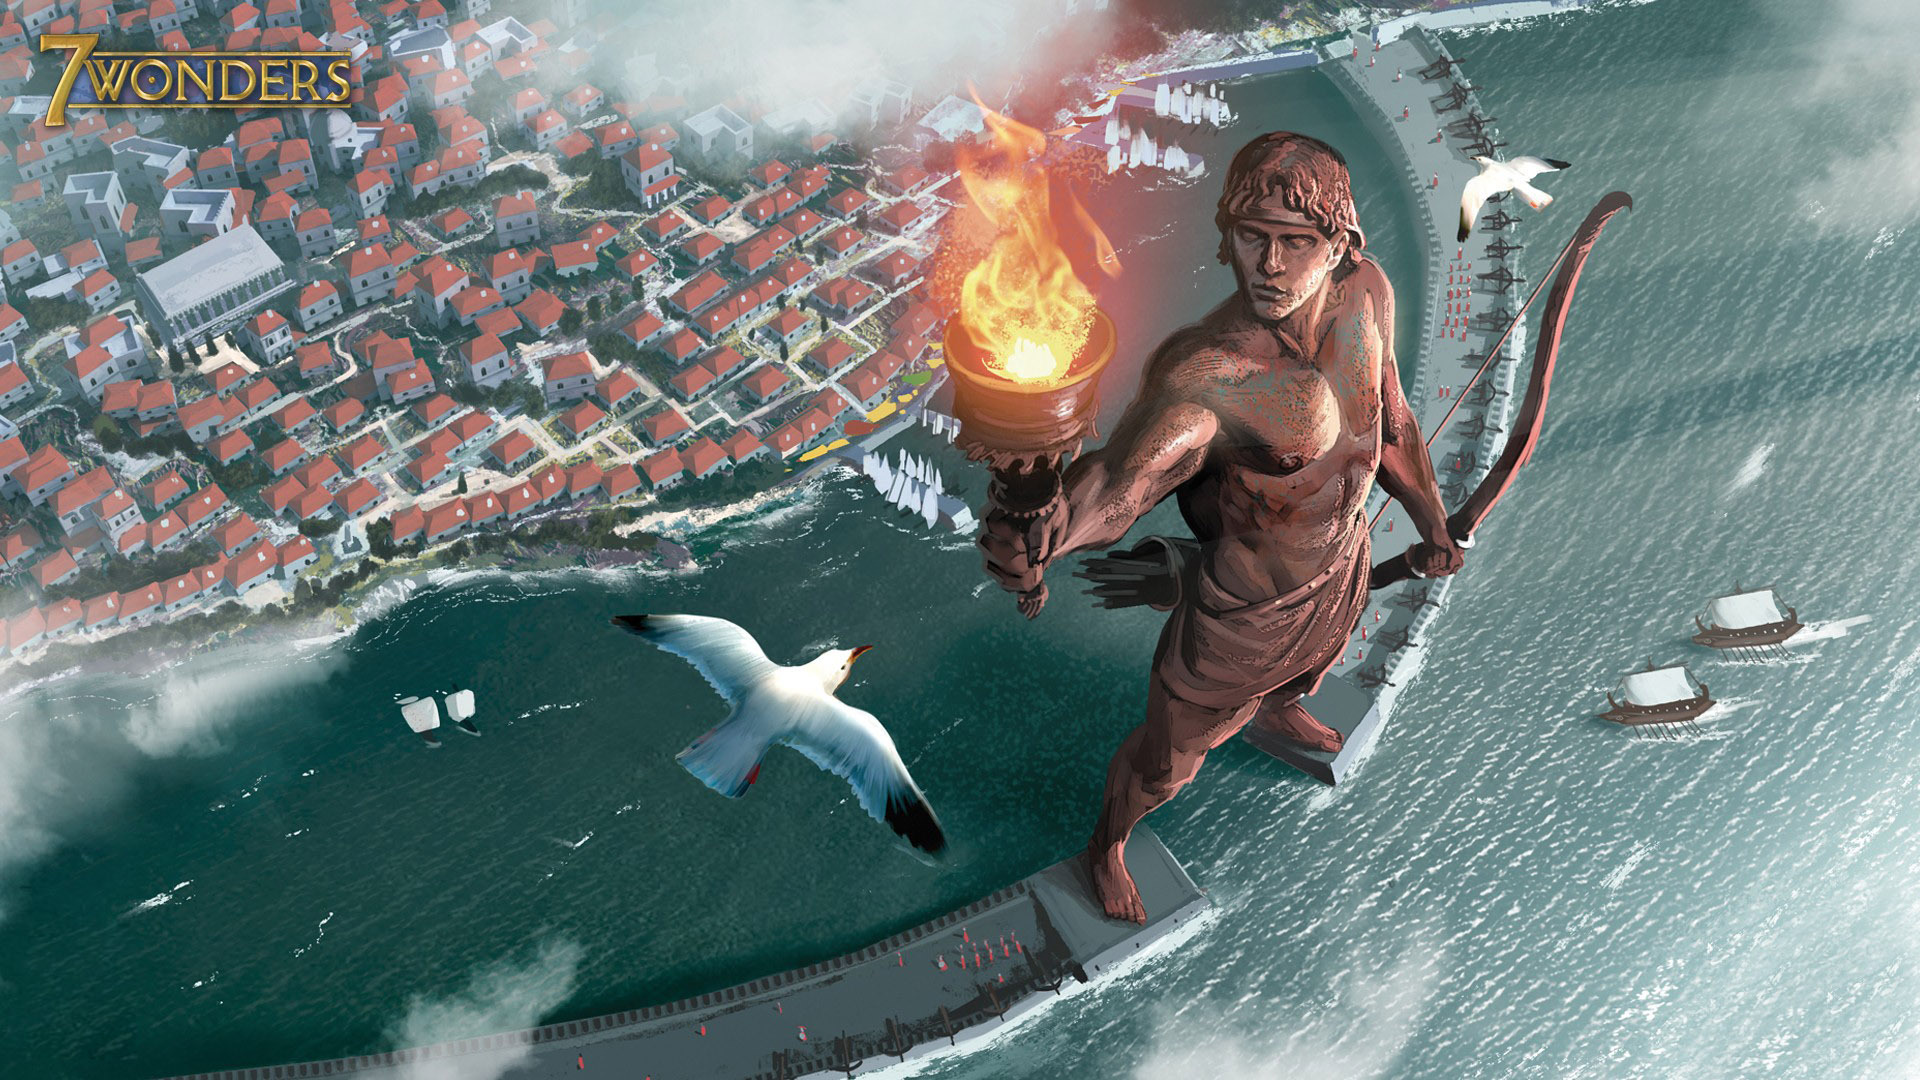 Colossus of Rhodes 1920 x 1080